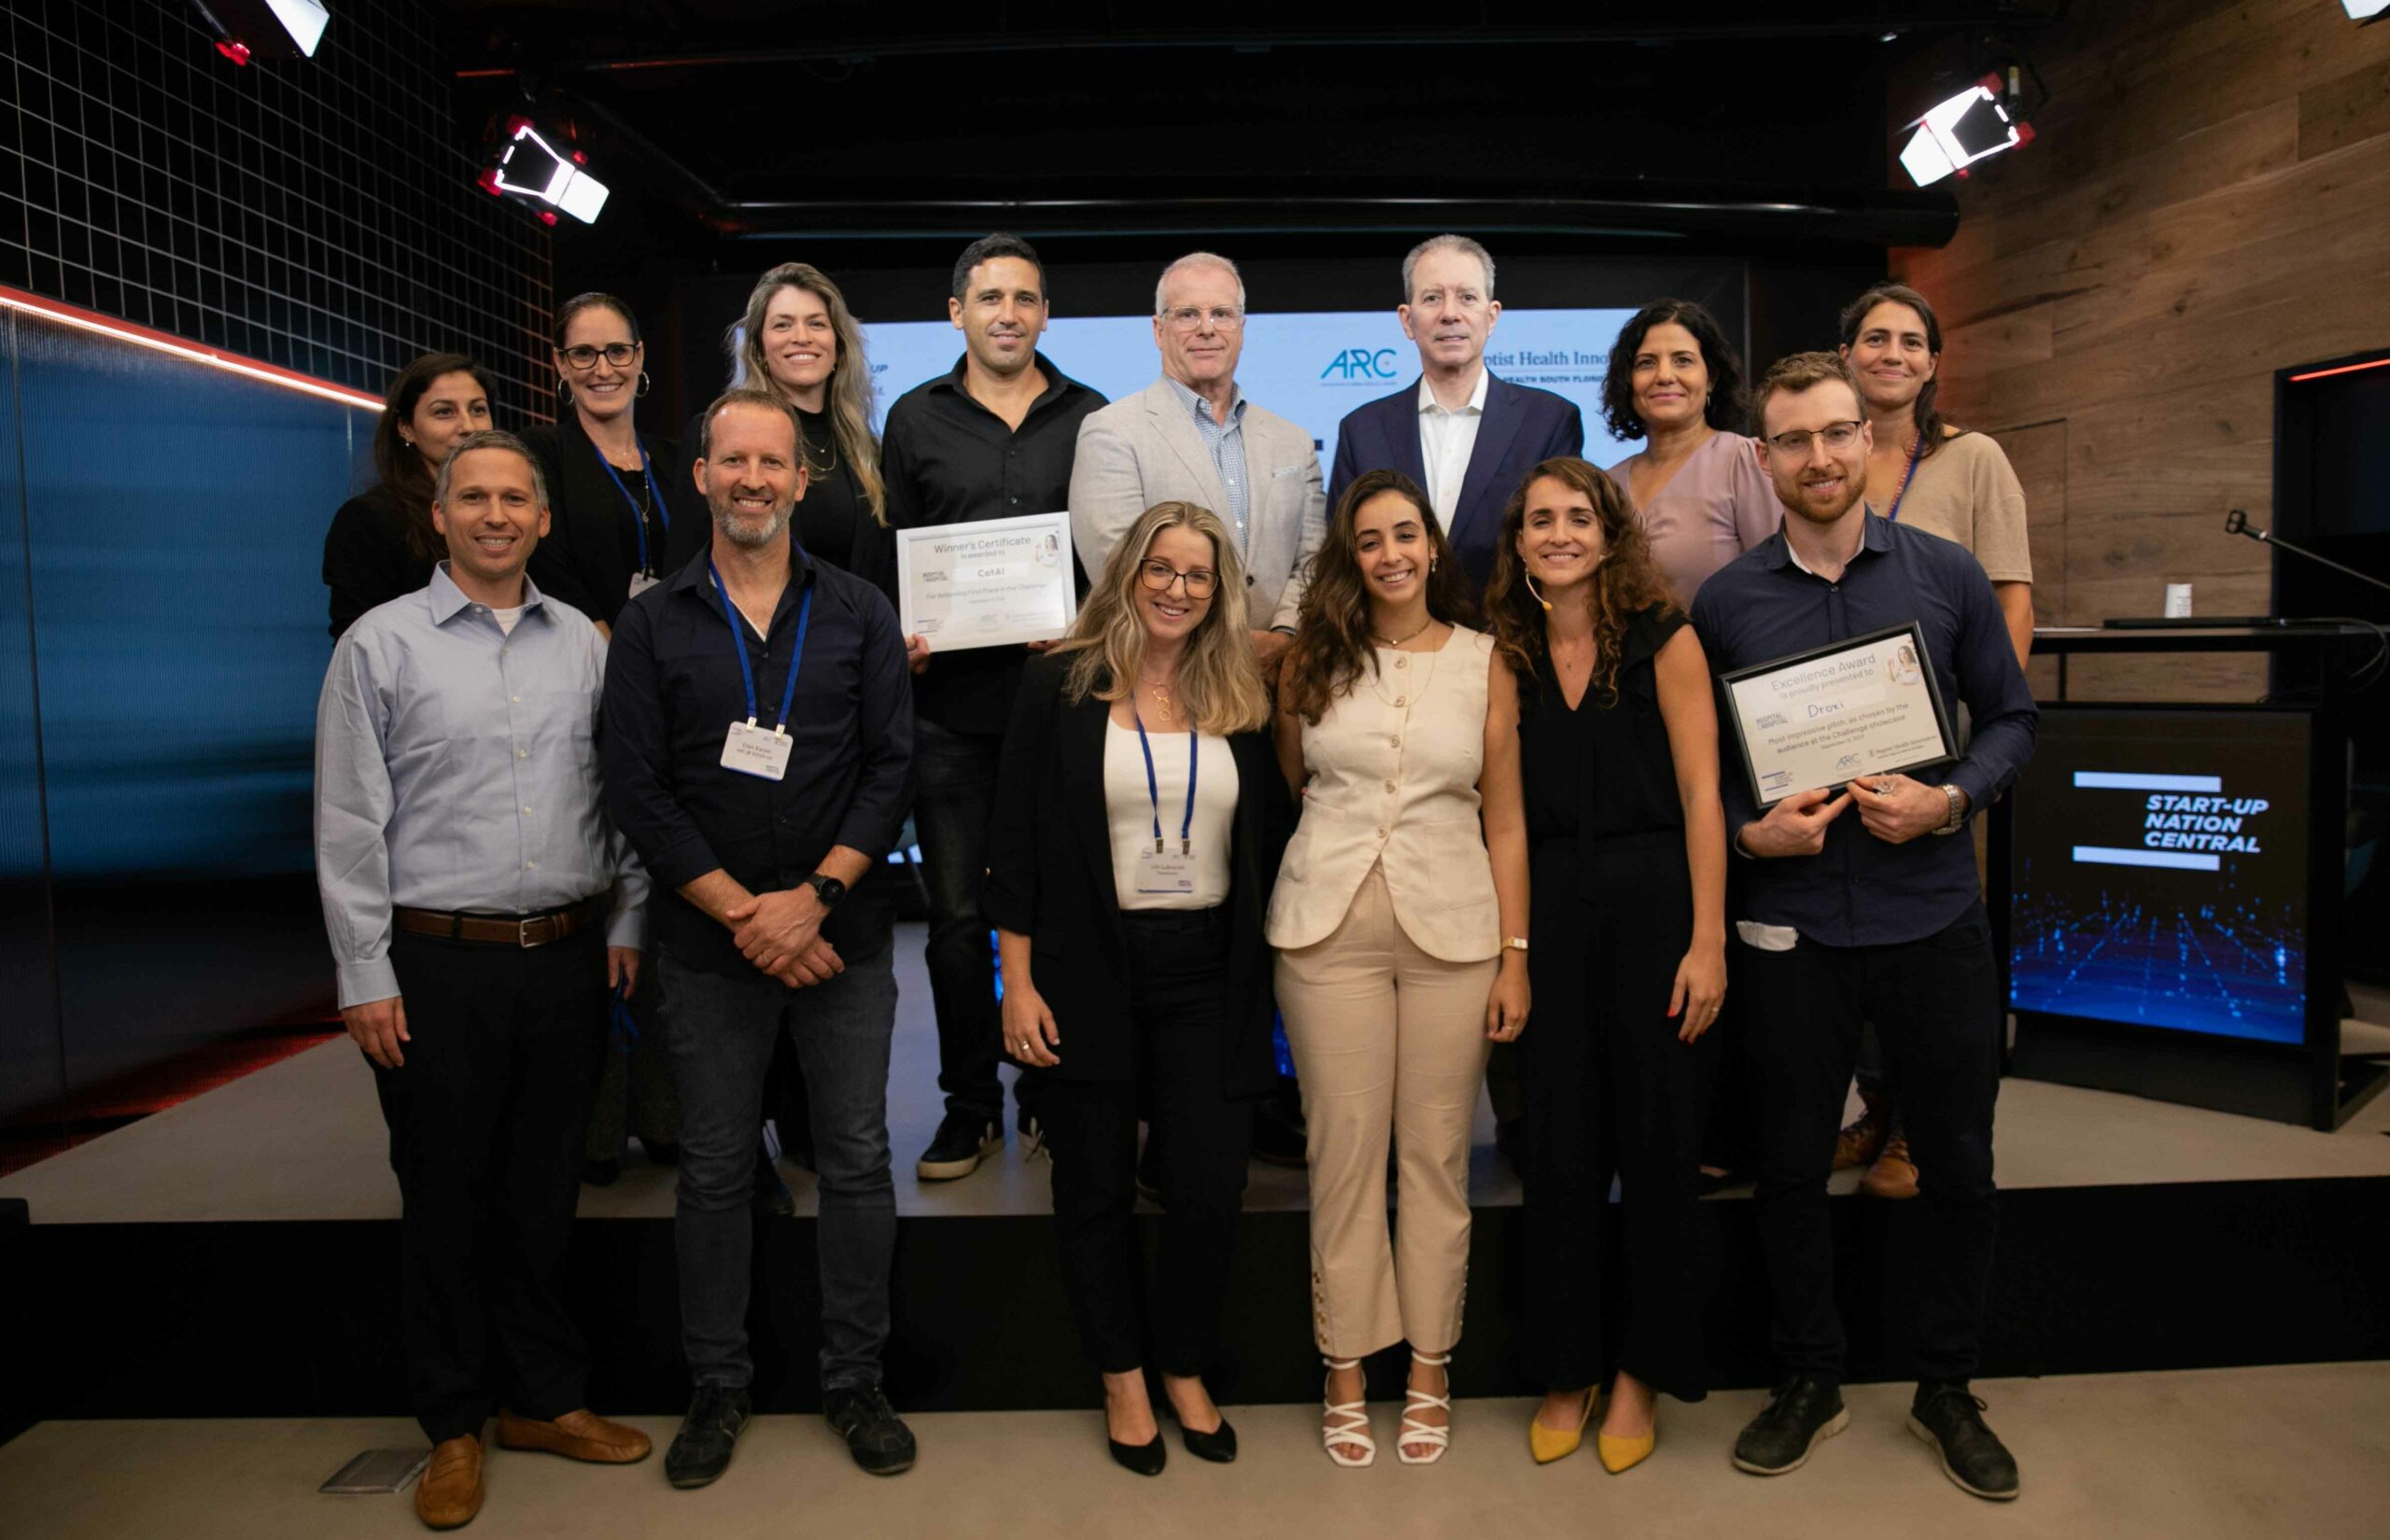 Start-Up Nation Central Announces CatAI is Winner of Hospital2Hospital Clinical Capacity Tech Challenge with U.S.-based Baptist Health South Florida, Sheba ARC Innovation, and Triventures